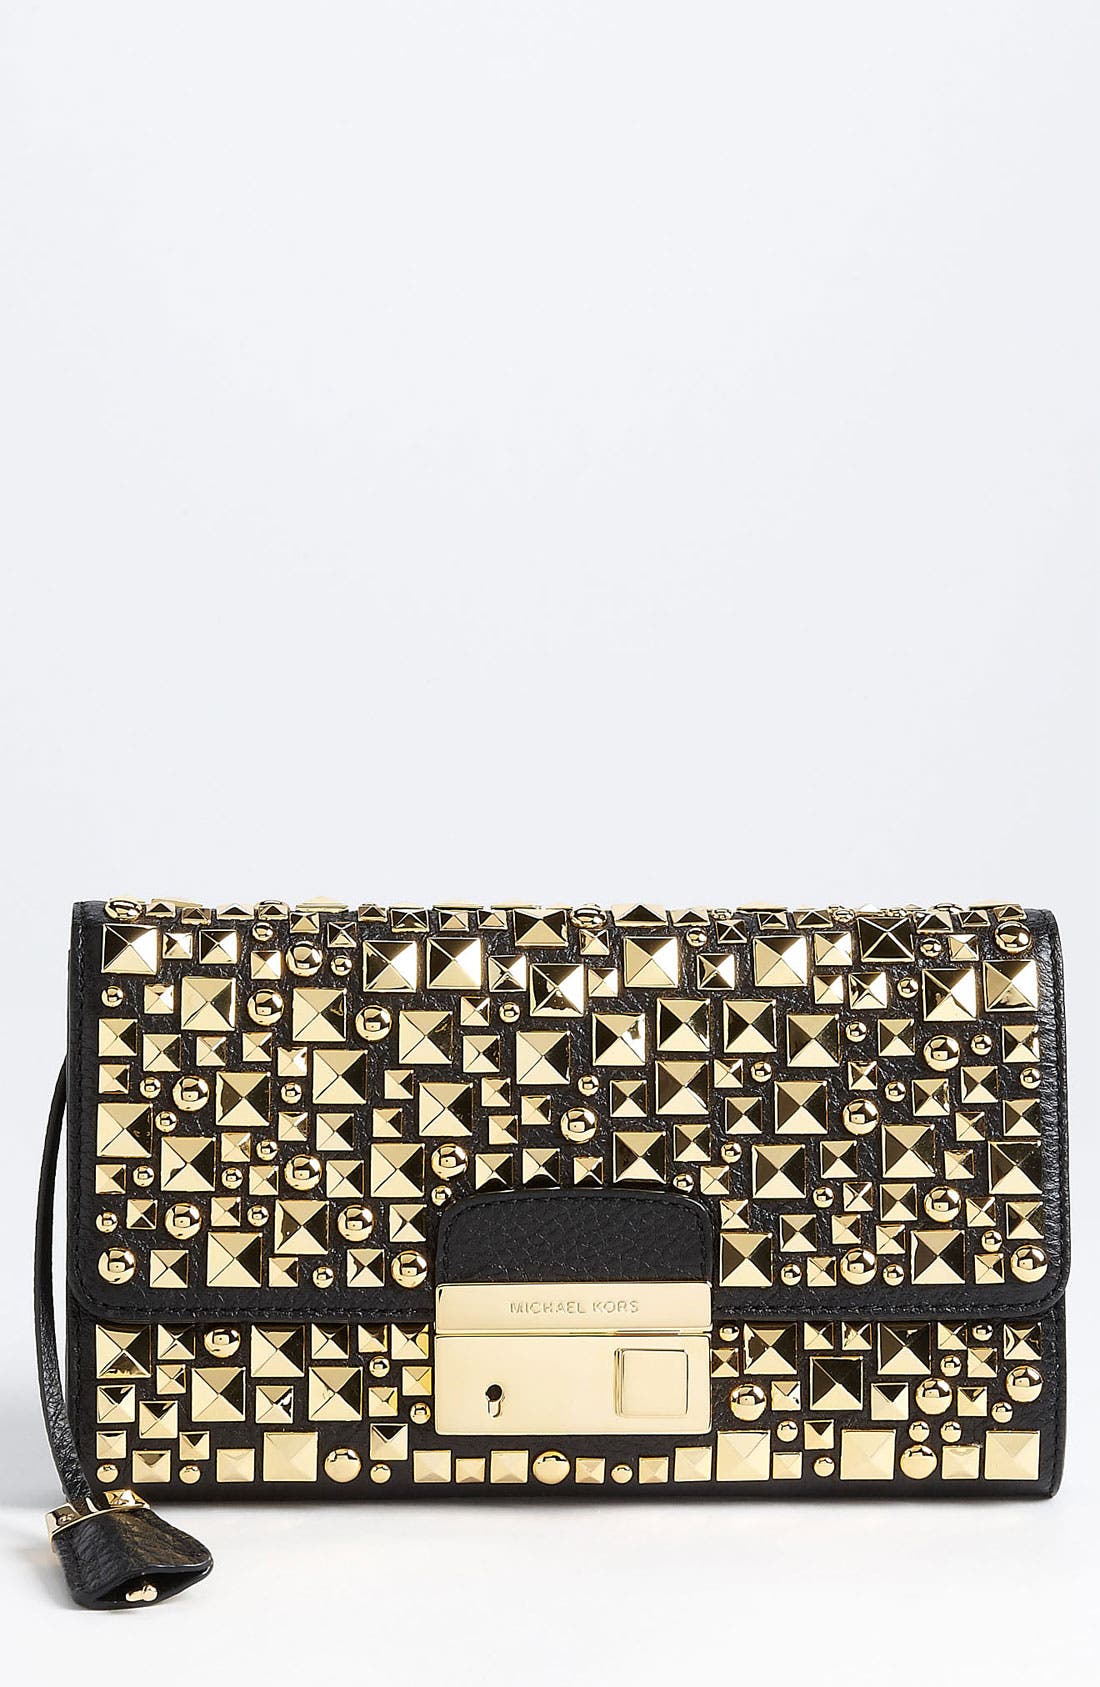 michael kors gia clutch with lock